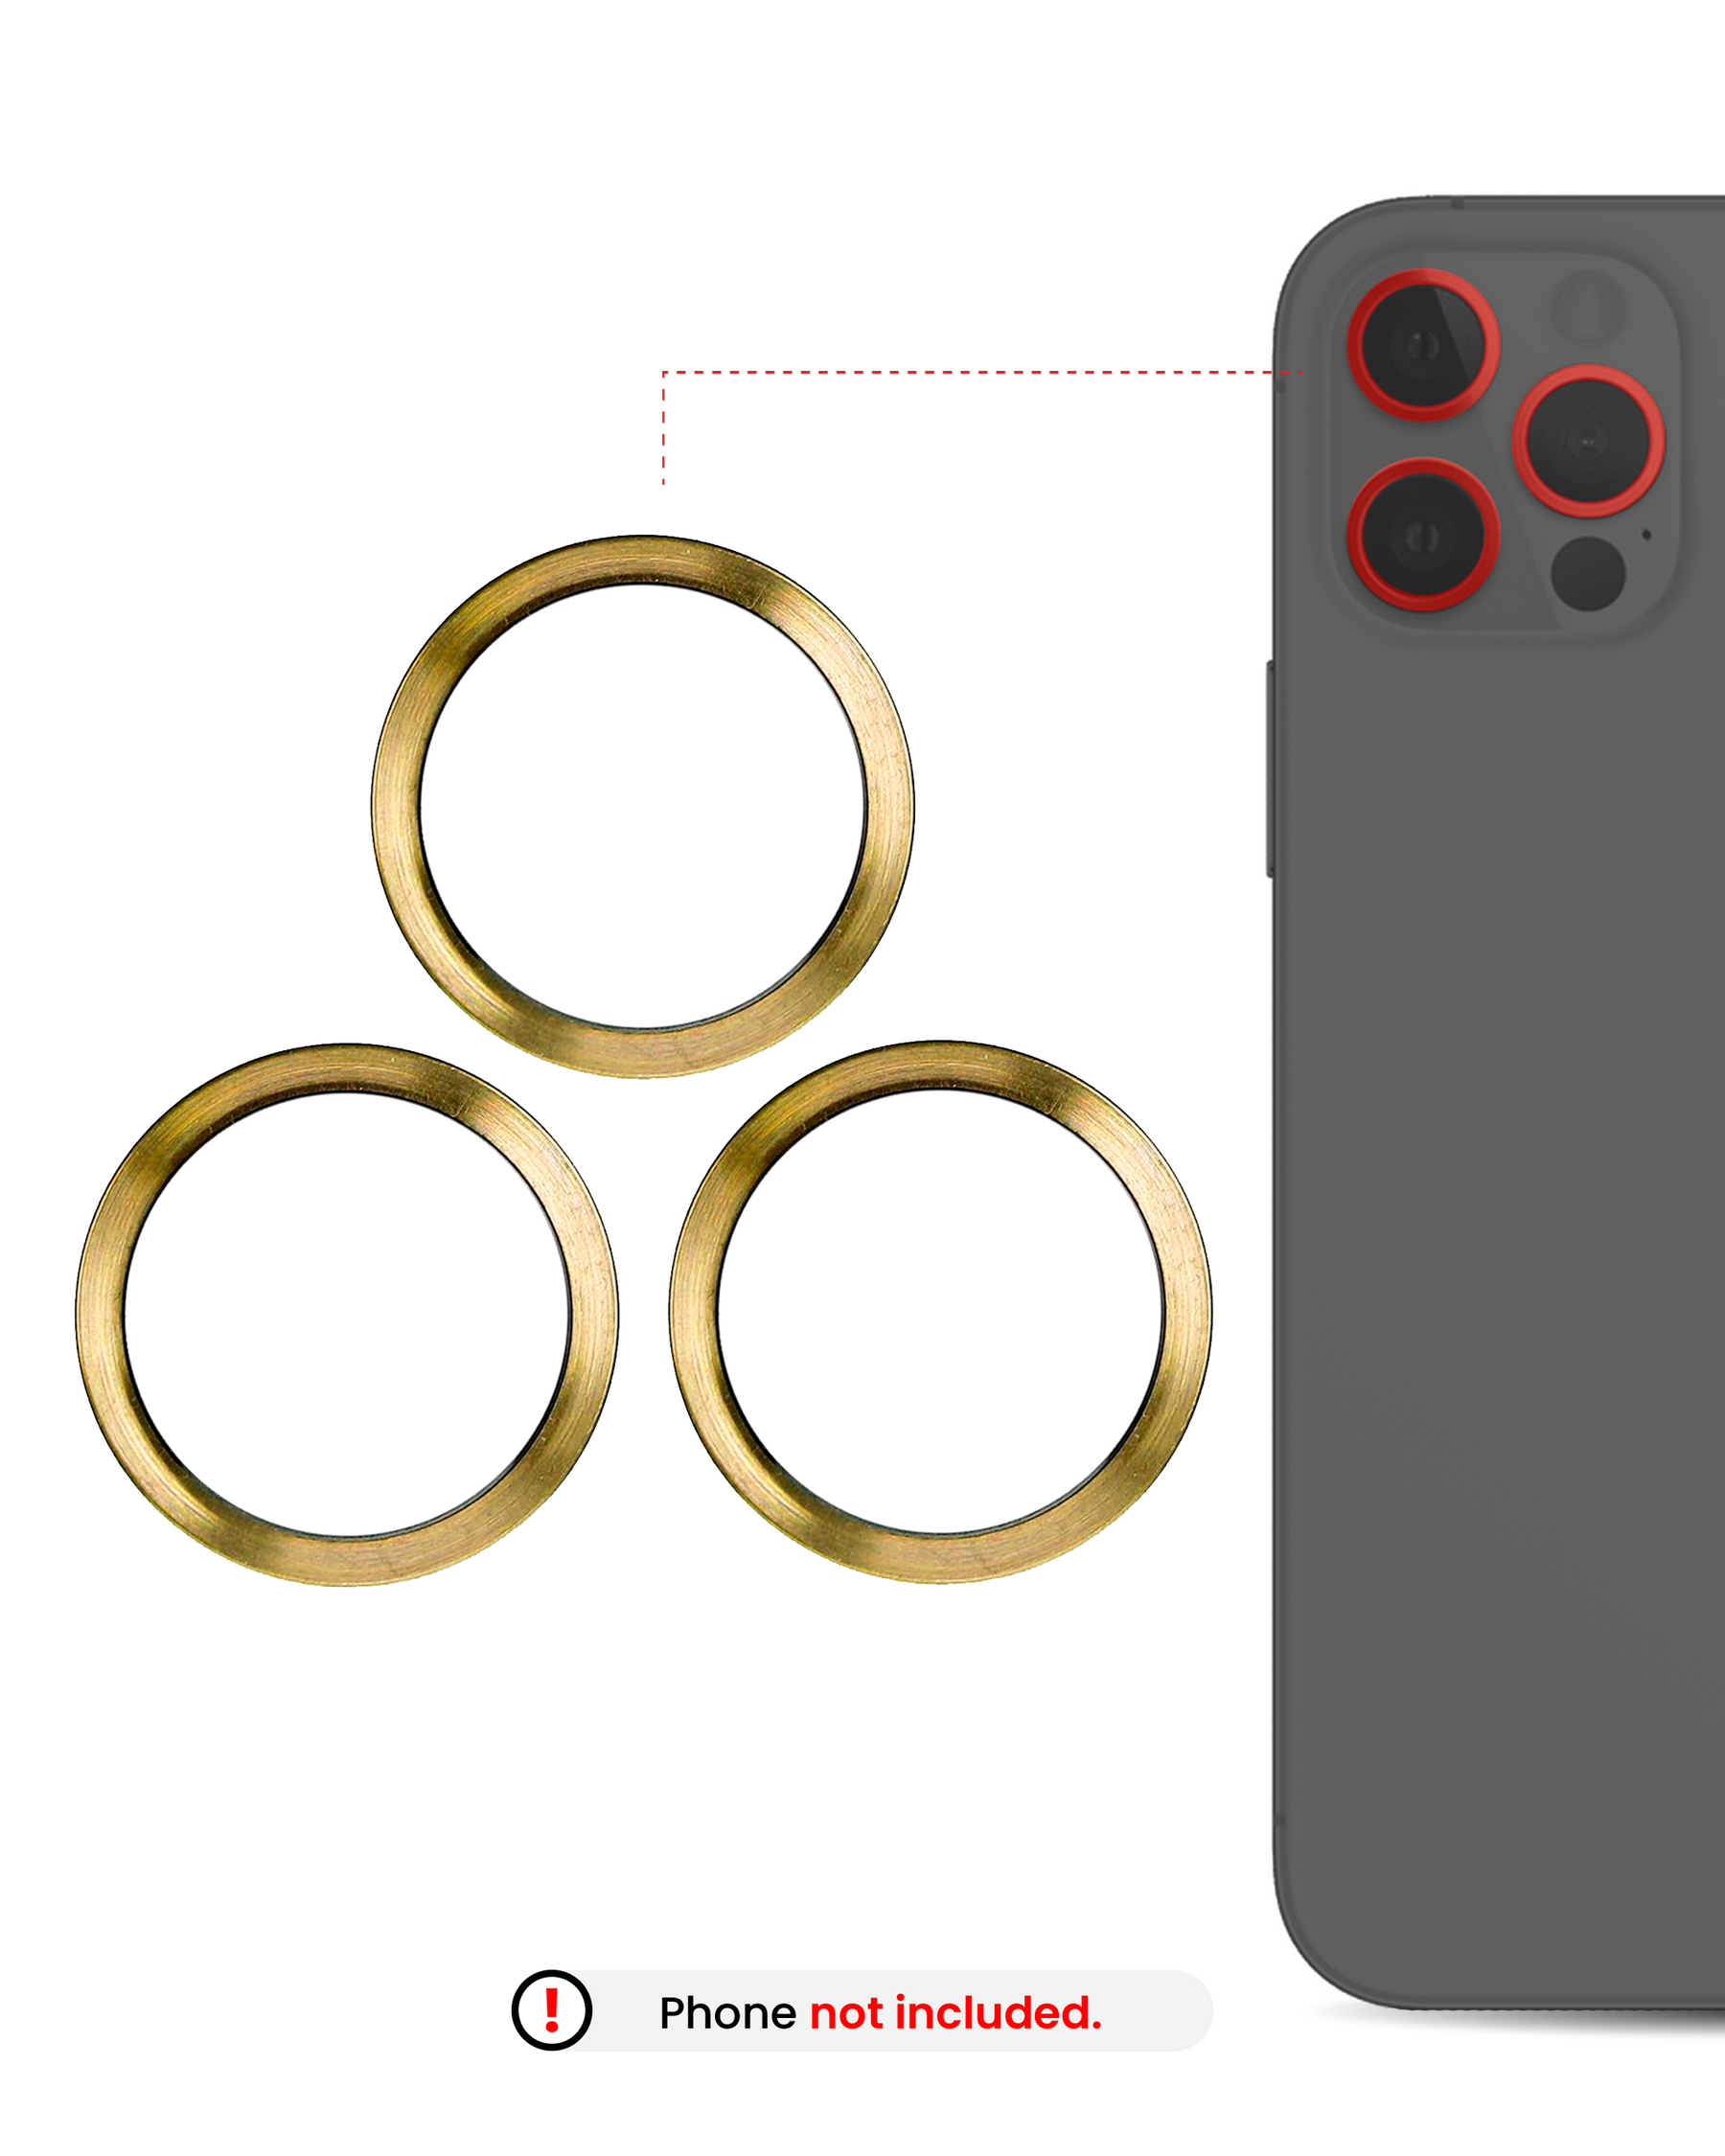 GOLD - BACK CAMERA BEZEL RING ONLY (3 PIECE SET) FOR IPHONE 12 PRO  (10 PACK)